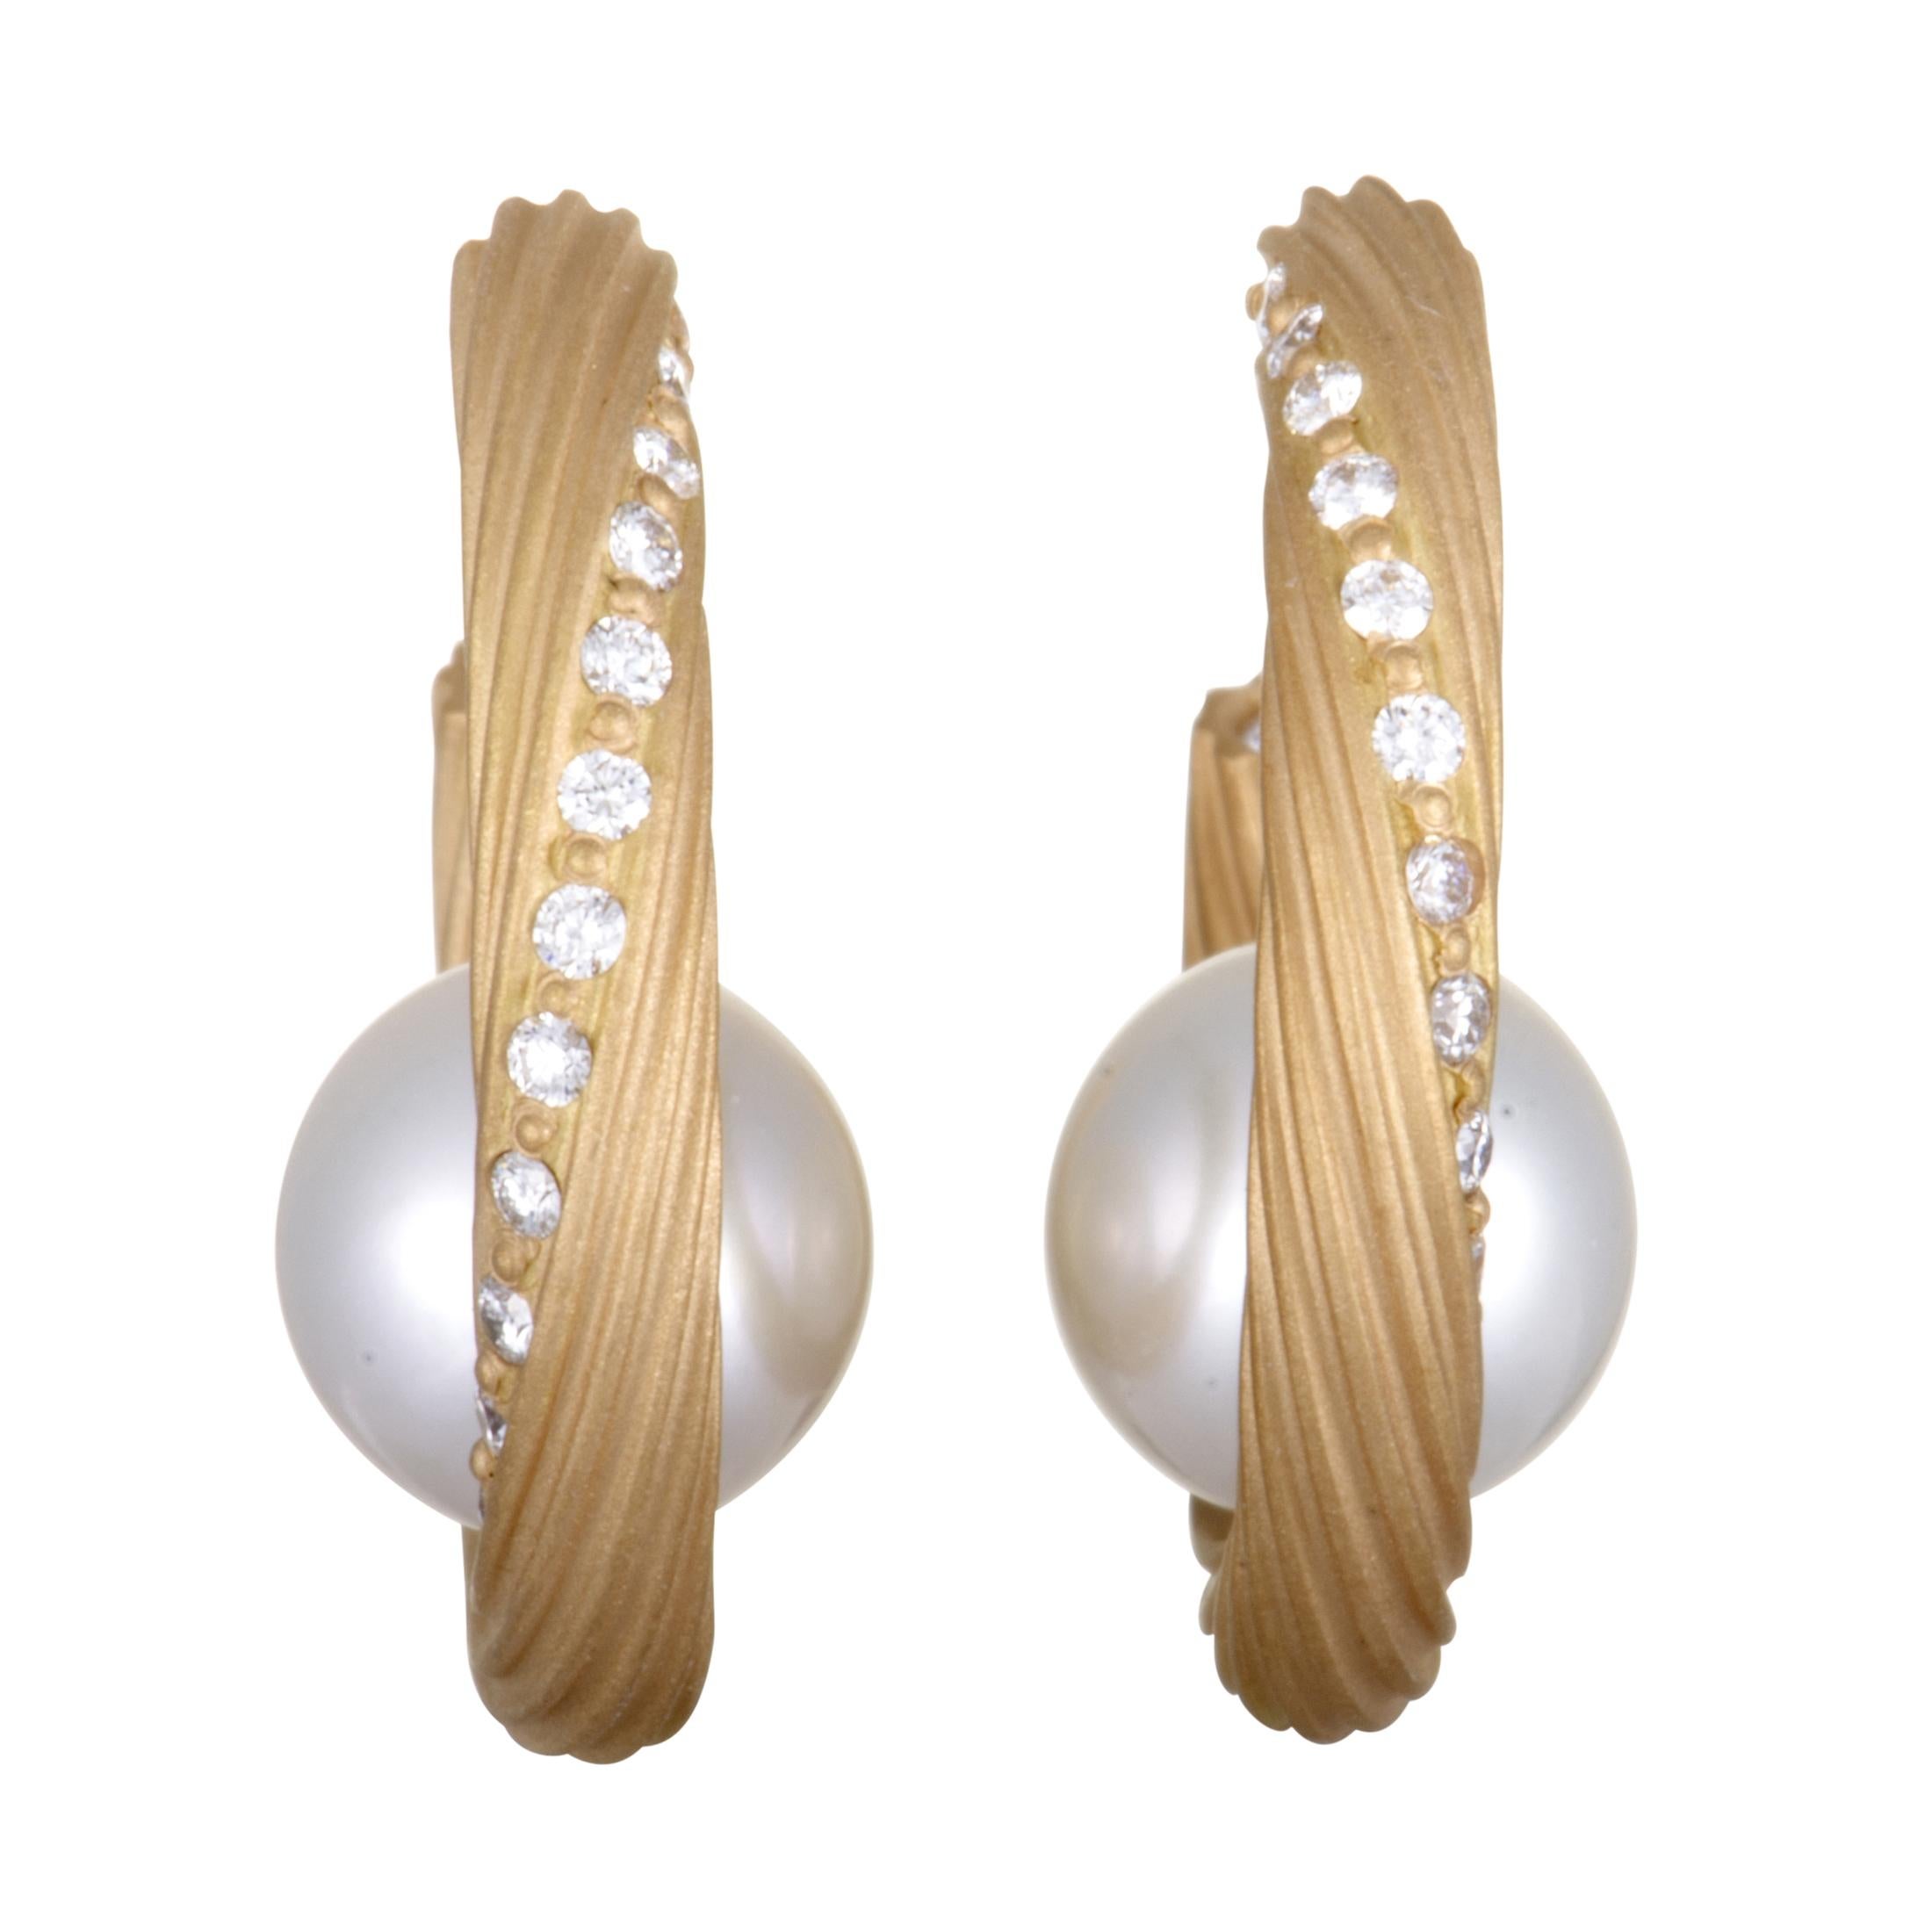 Add a gorgeously feminine touch to your style with these sublime earrings that feature a splendidly elegant design topped off with incredibly attractive décor. Presented by Mikimoto, the pair is exquisitely crafted from luxurious 18K yellow gold,